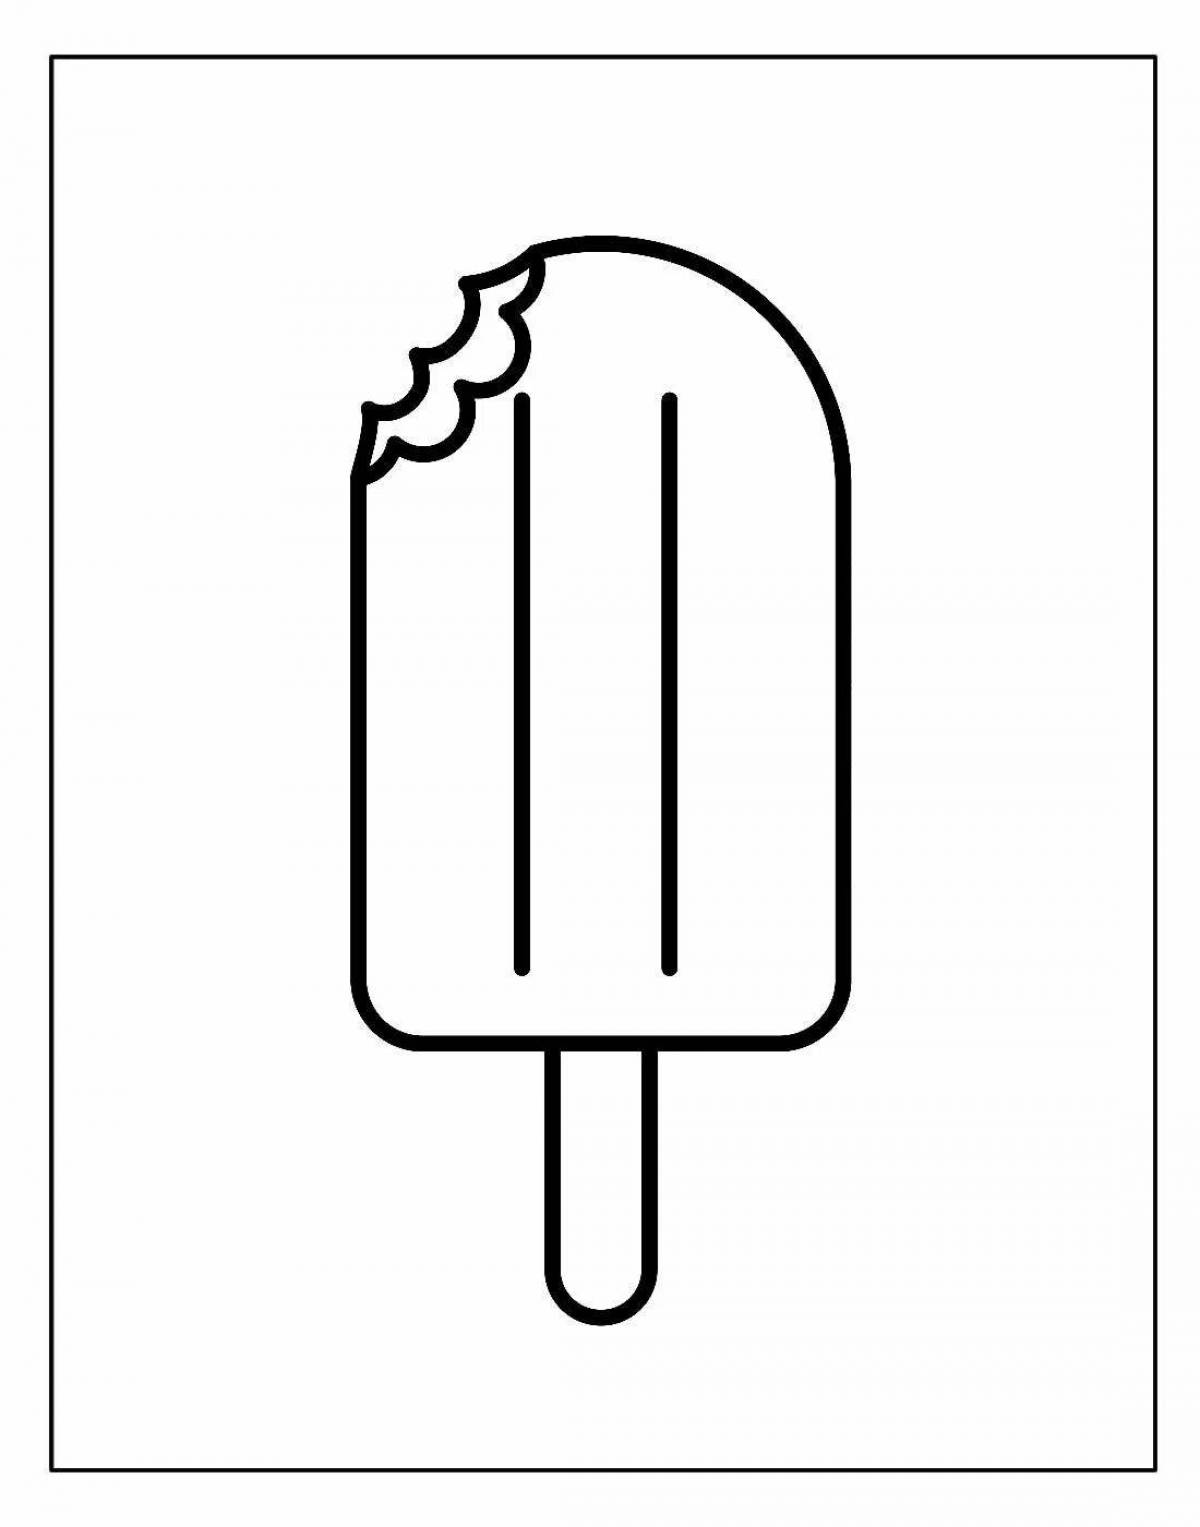 Fun ice popsicle coloring page